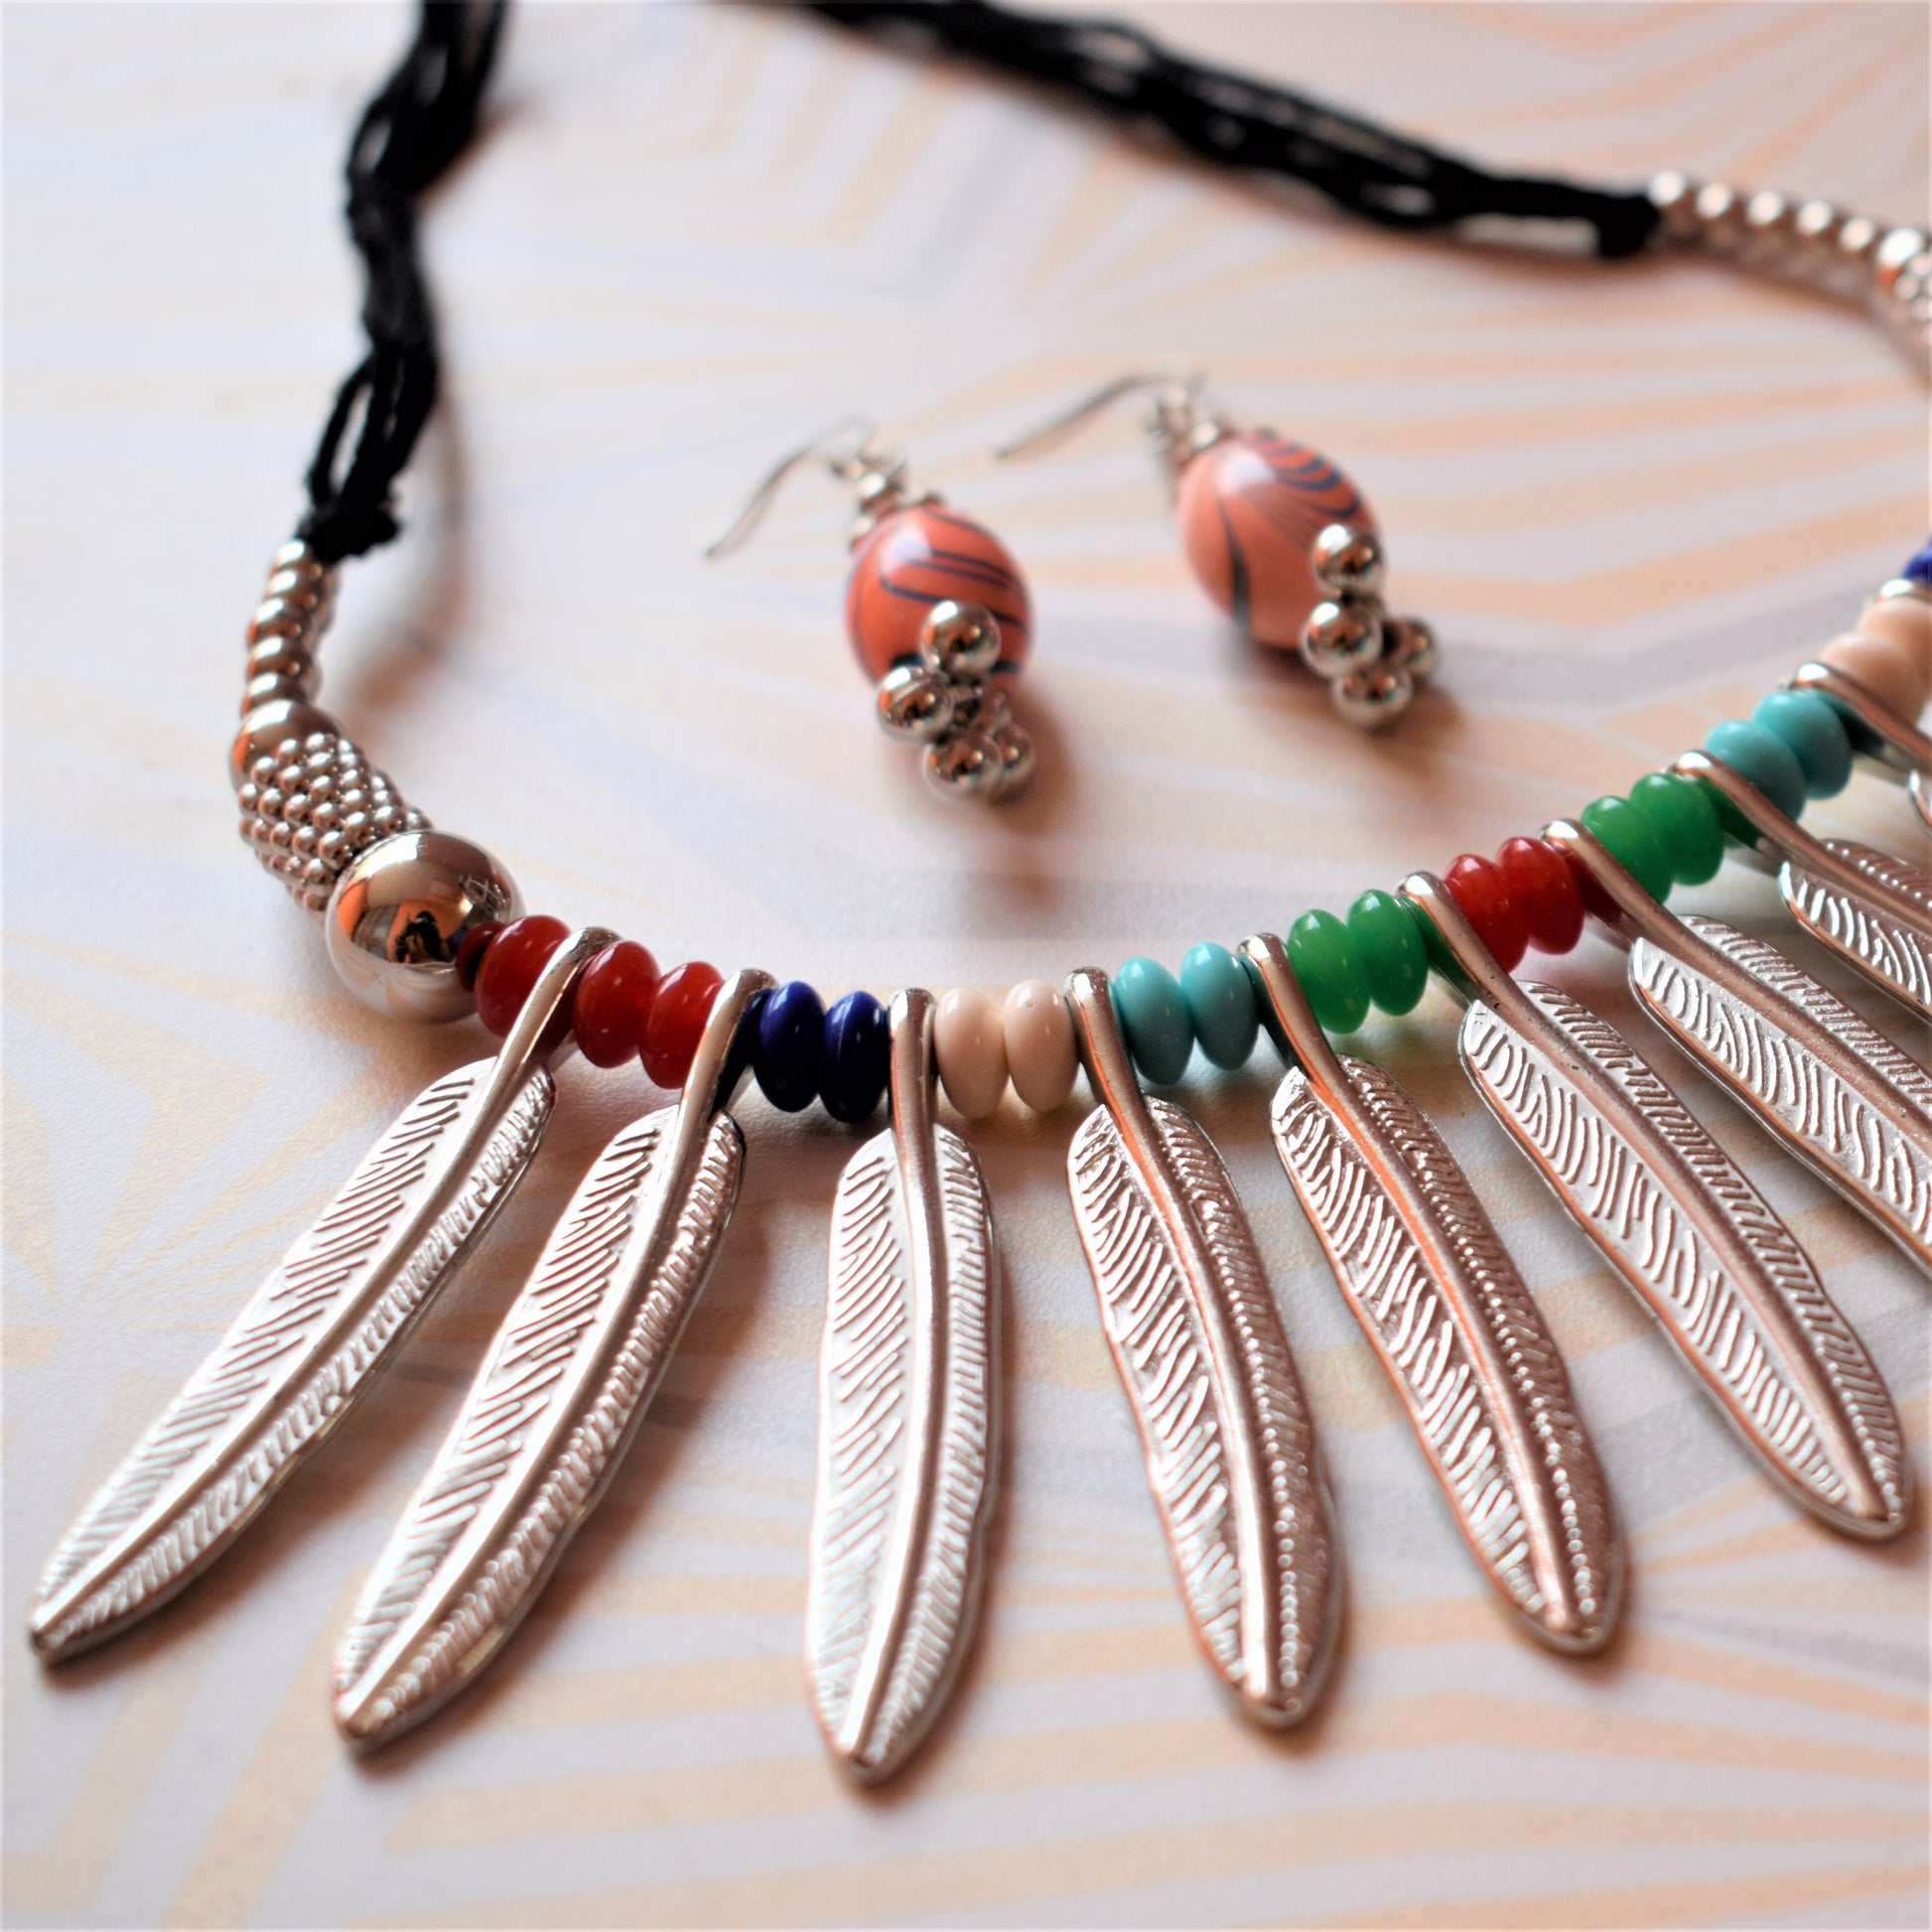 Silver Feather Choker Necklace with Earrings - GlitterGleam